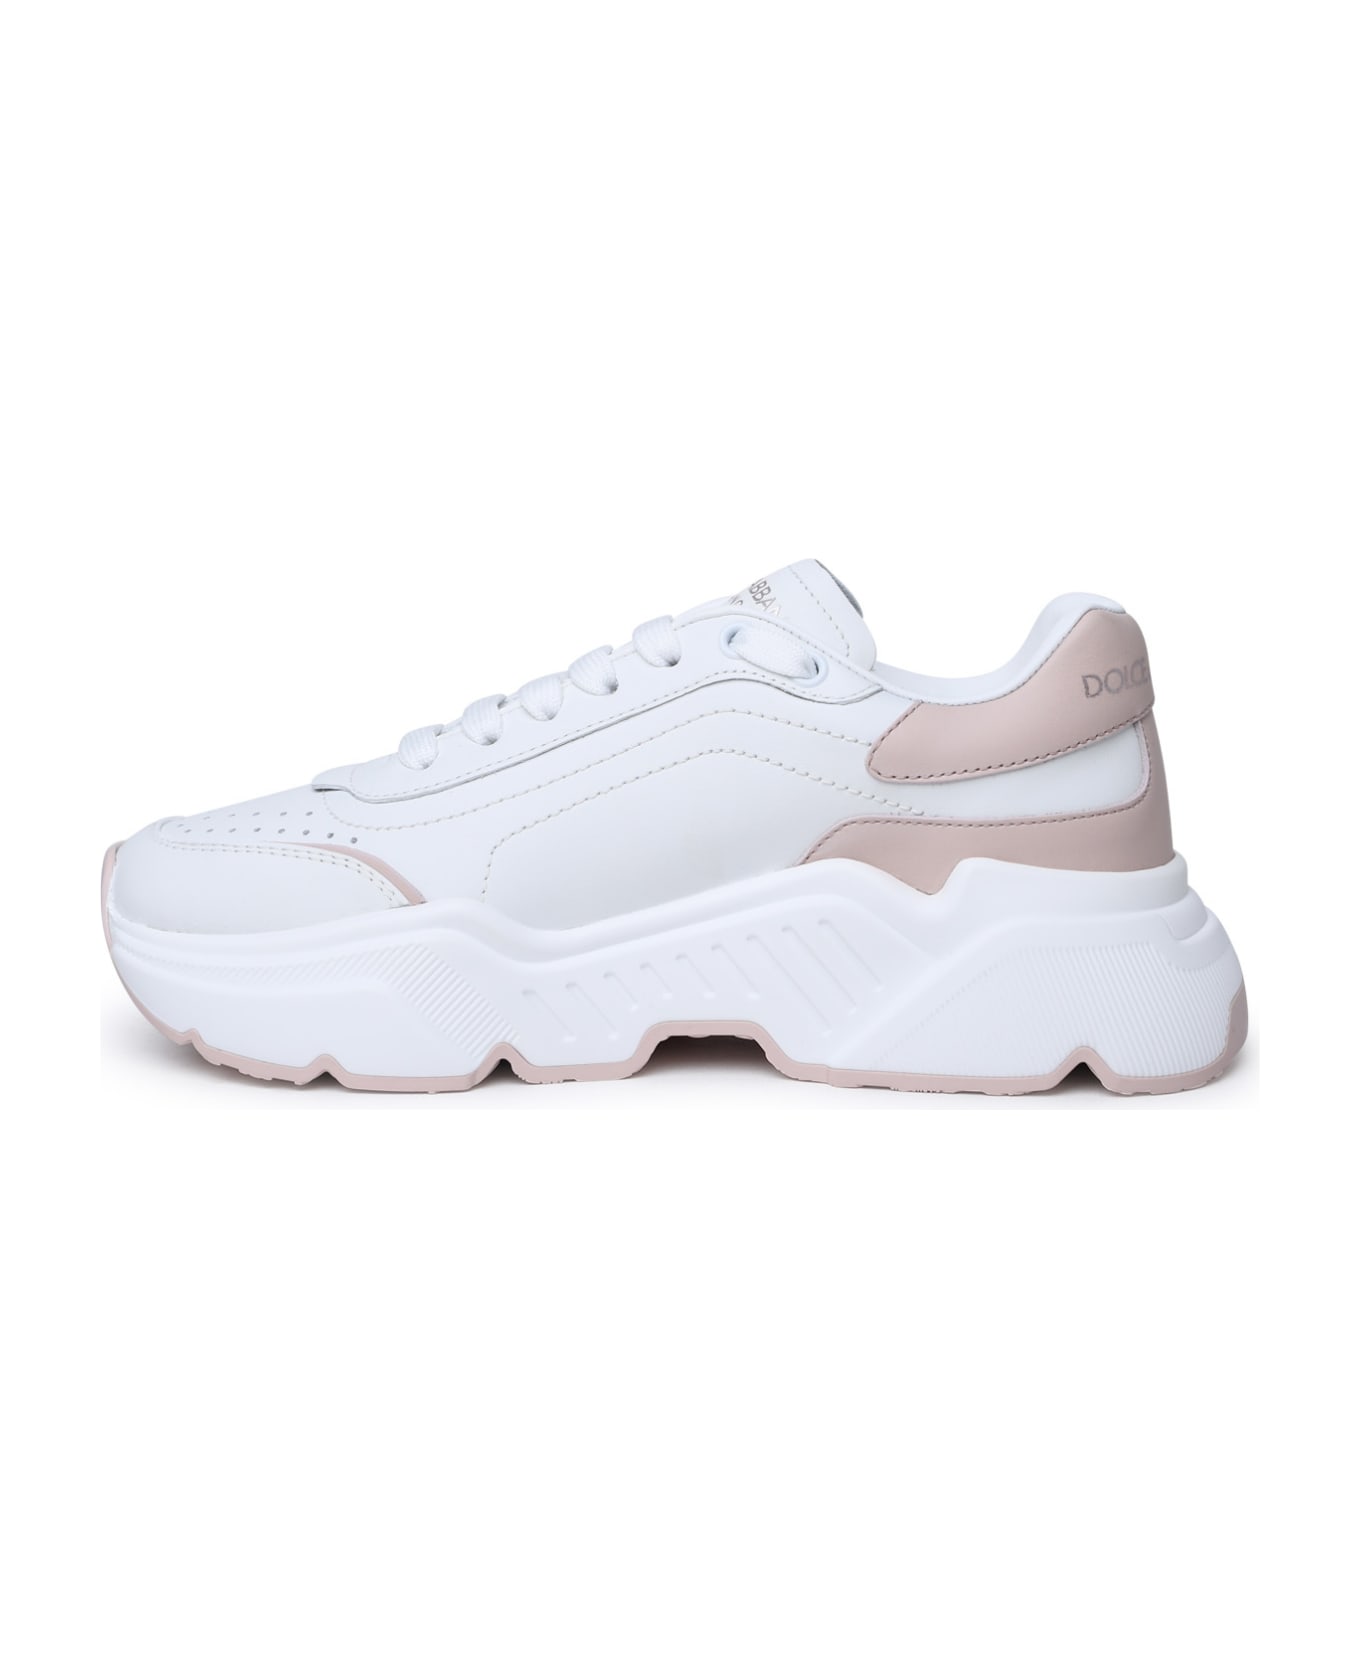 Dolce & Gabbana 'daymaster' White Leather Sneakers - Pink スニーカー